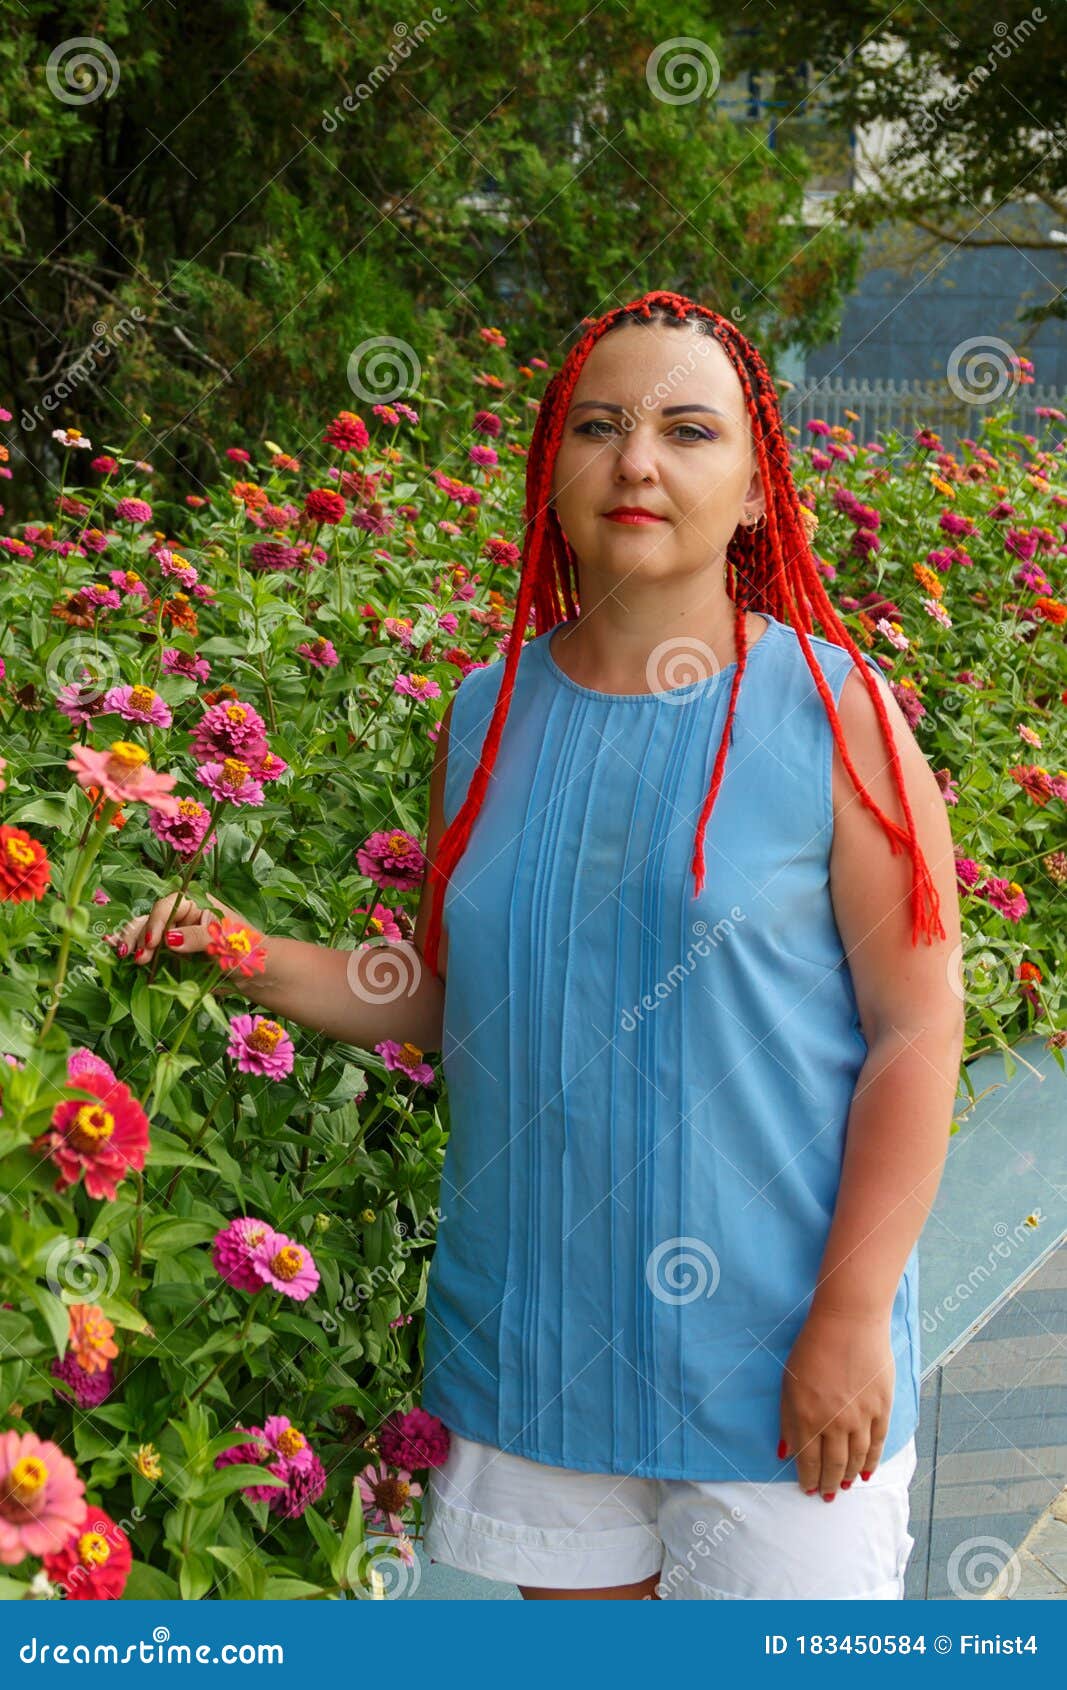 young woman with red hair posing in red orange colors